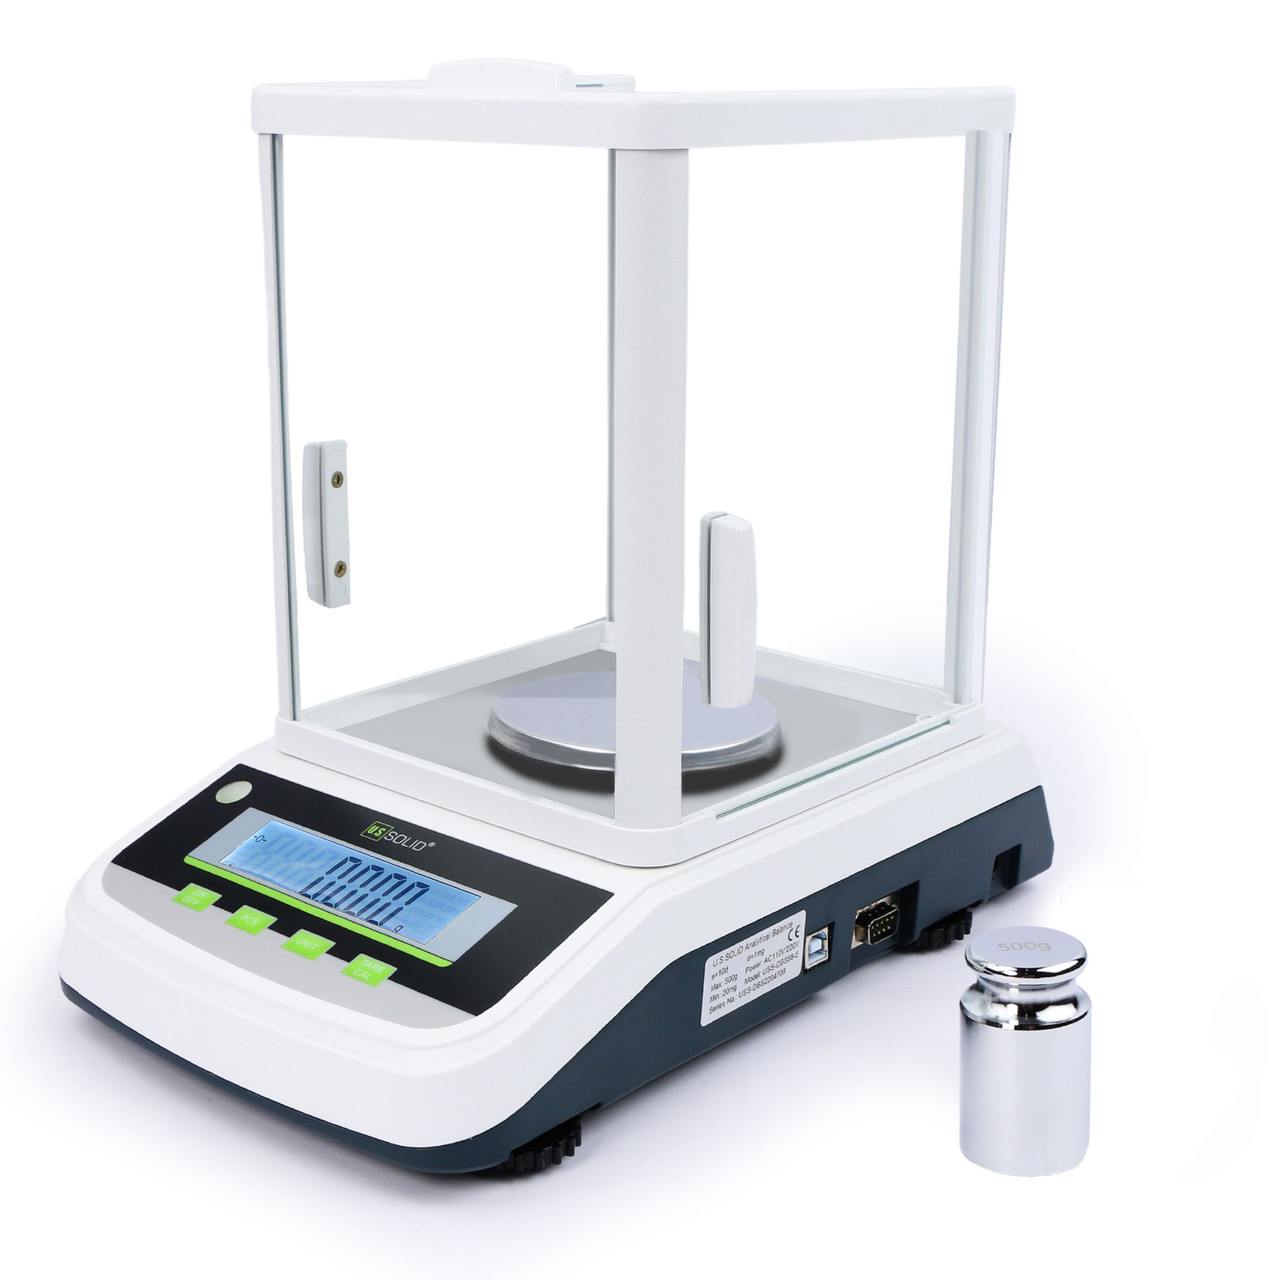 U.S. Solid 300 x 0.001g Analytical Balance, 1 mg Digital Precision Lab  Scale with 2 LCD Screens, RS232 and USB Interface